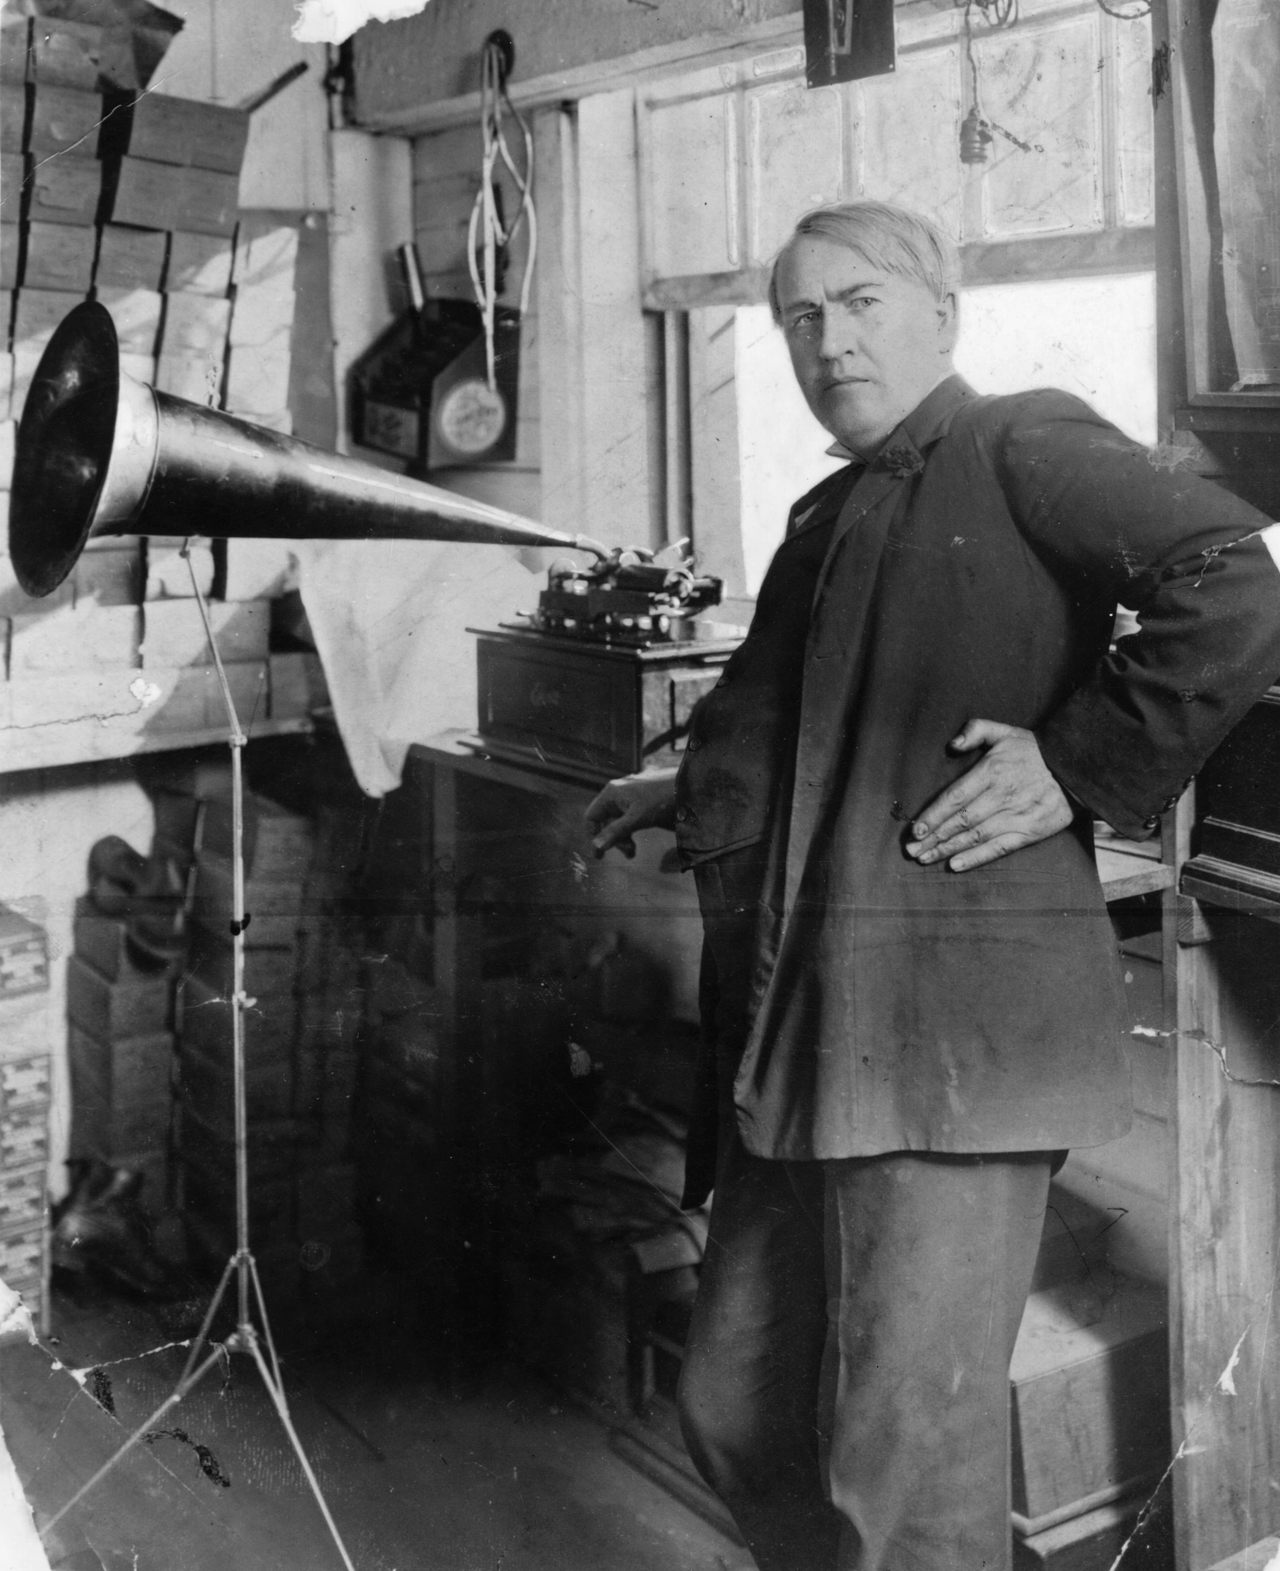 During his lifetime, Thomas Edison received more than one thousand patents. But when asked which of his many inventions was his favorite, Edison said, "I like the phonograph best. Doubtless this is because I love music."